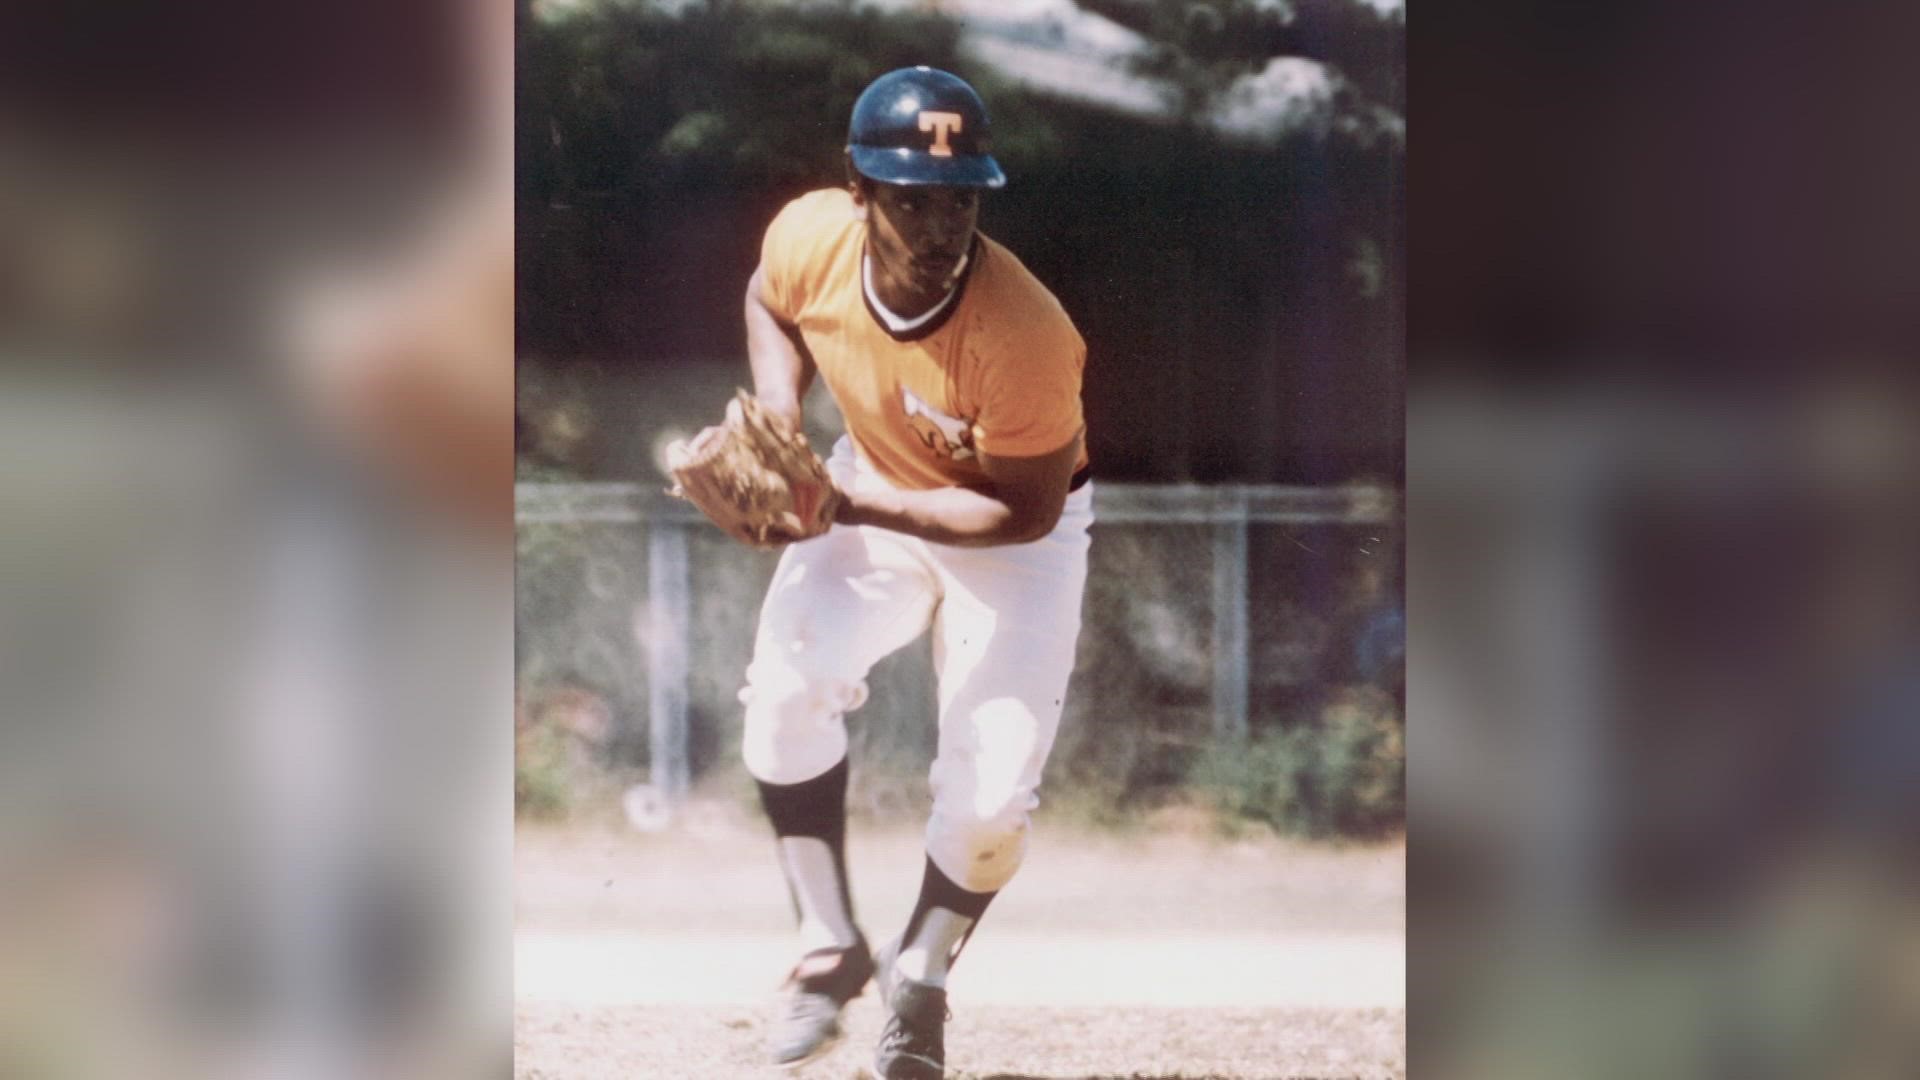 Condredge Holloway, who is mostly known for all his success with Tennessee football, will be inducted into the National College Baseball Hall of Fame in February.